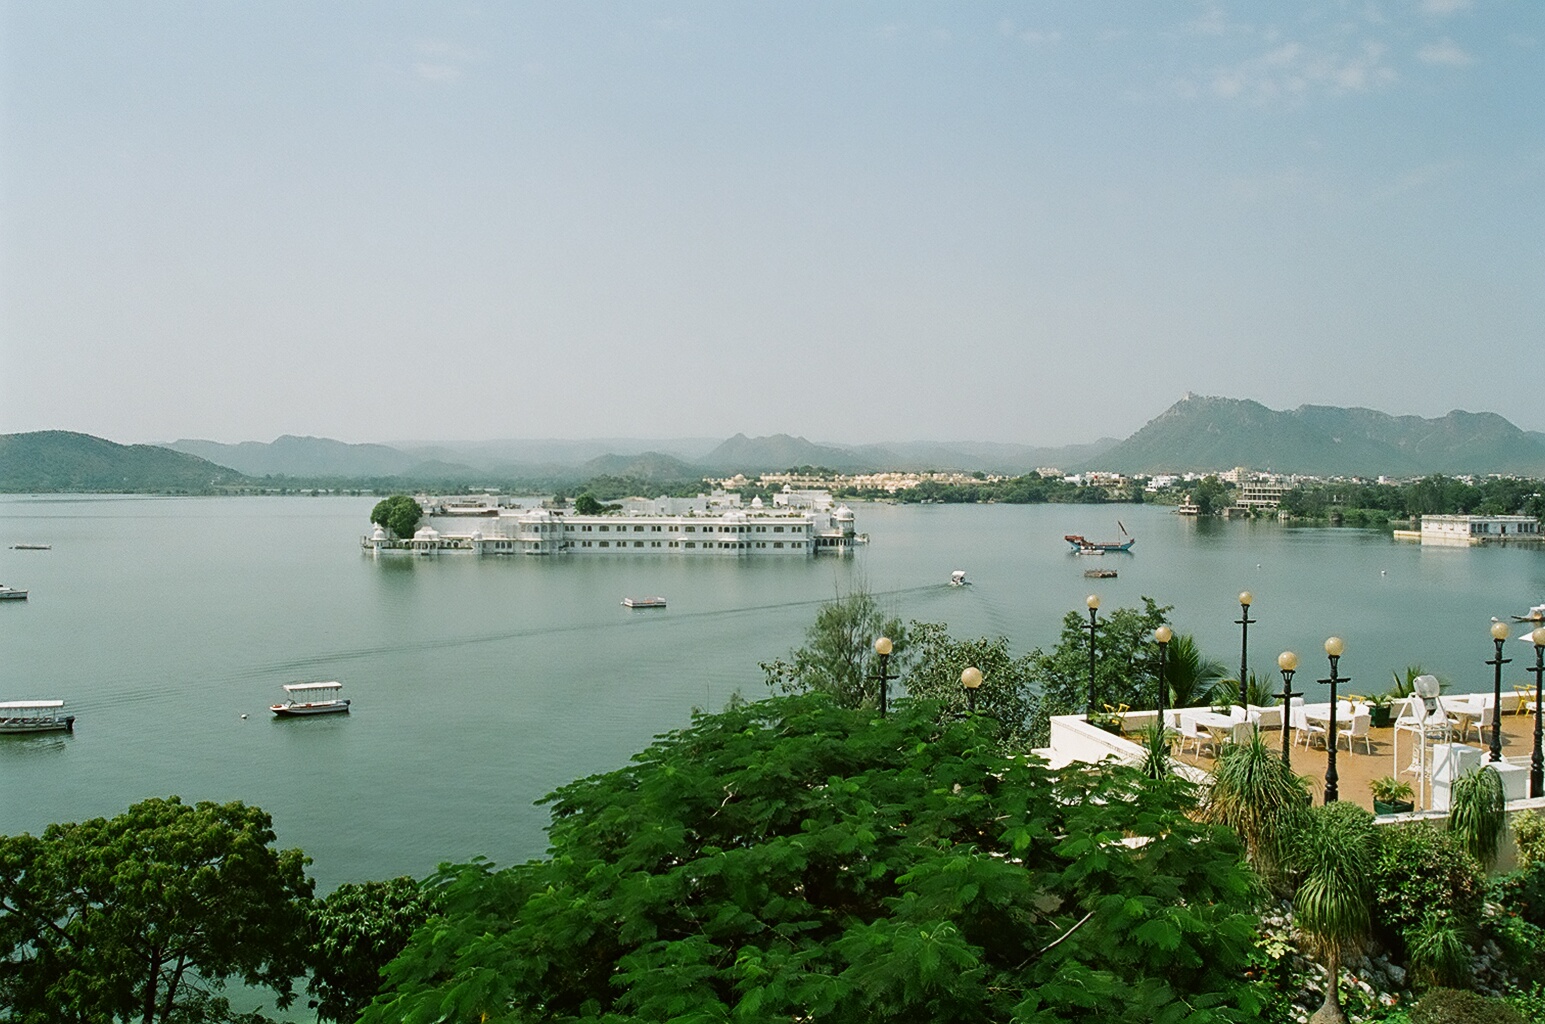  Lake Pichola is one such artificial lake which is at the centre of  Udaipur, Rajasthan India. It was created in the year 1362 AD